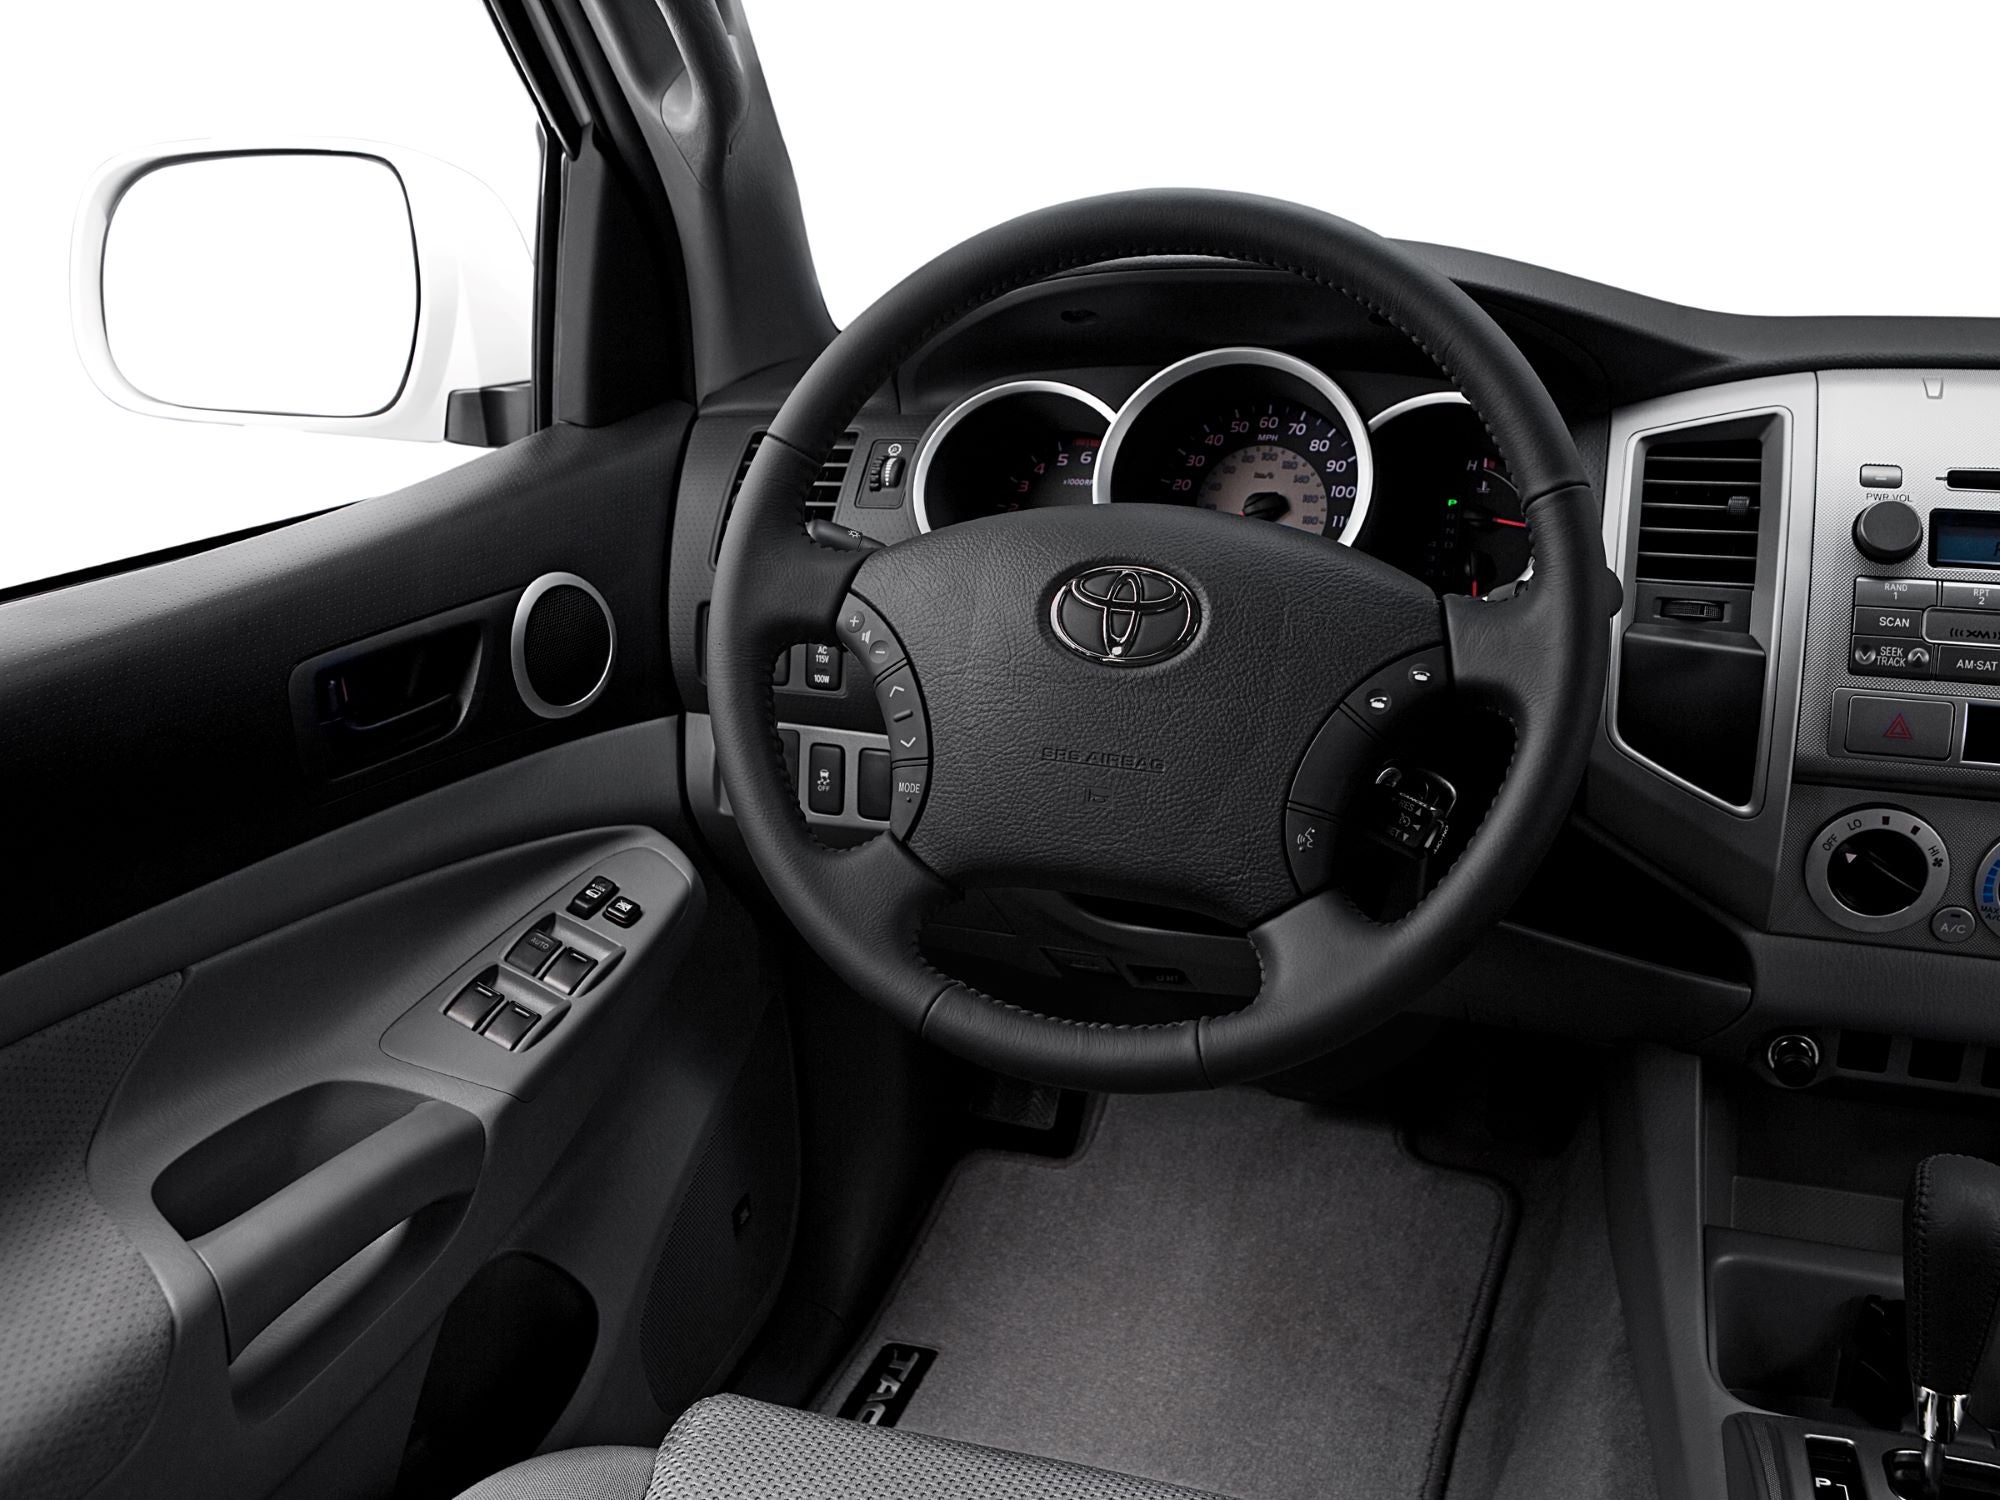 The 2009 Toyota Tacoma Had Excellent Interior Space, a six speed manual transmission, and a chrome package.